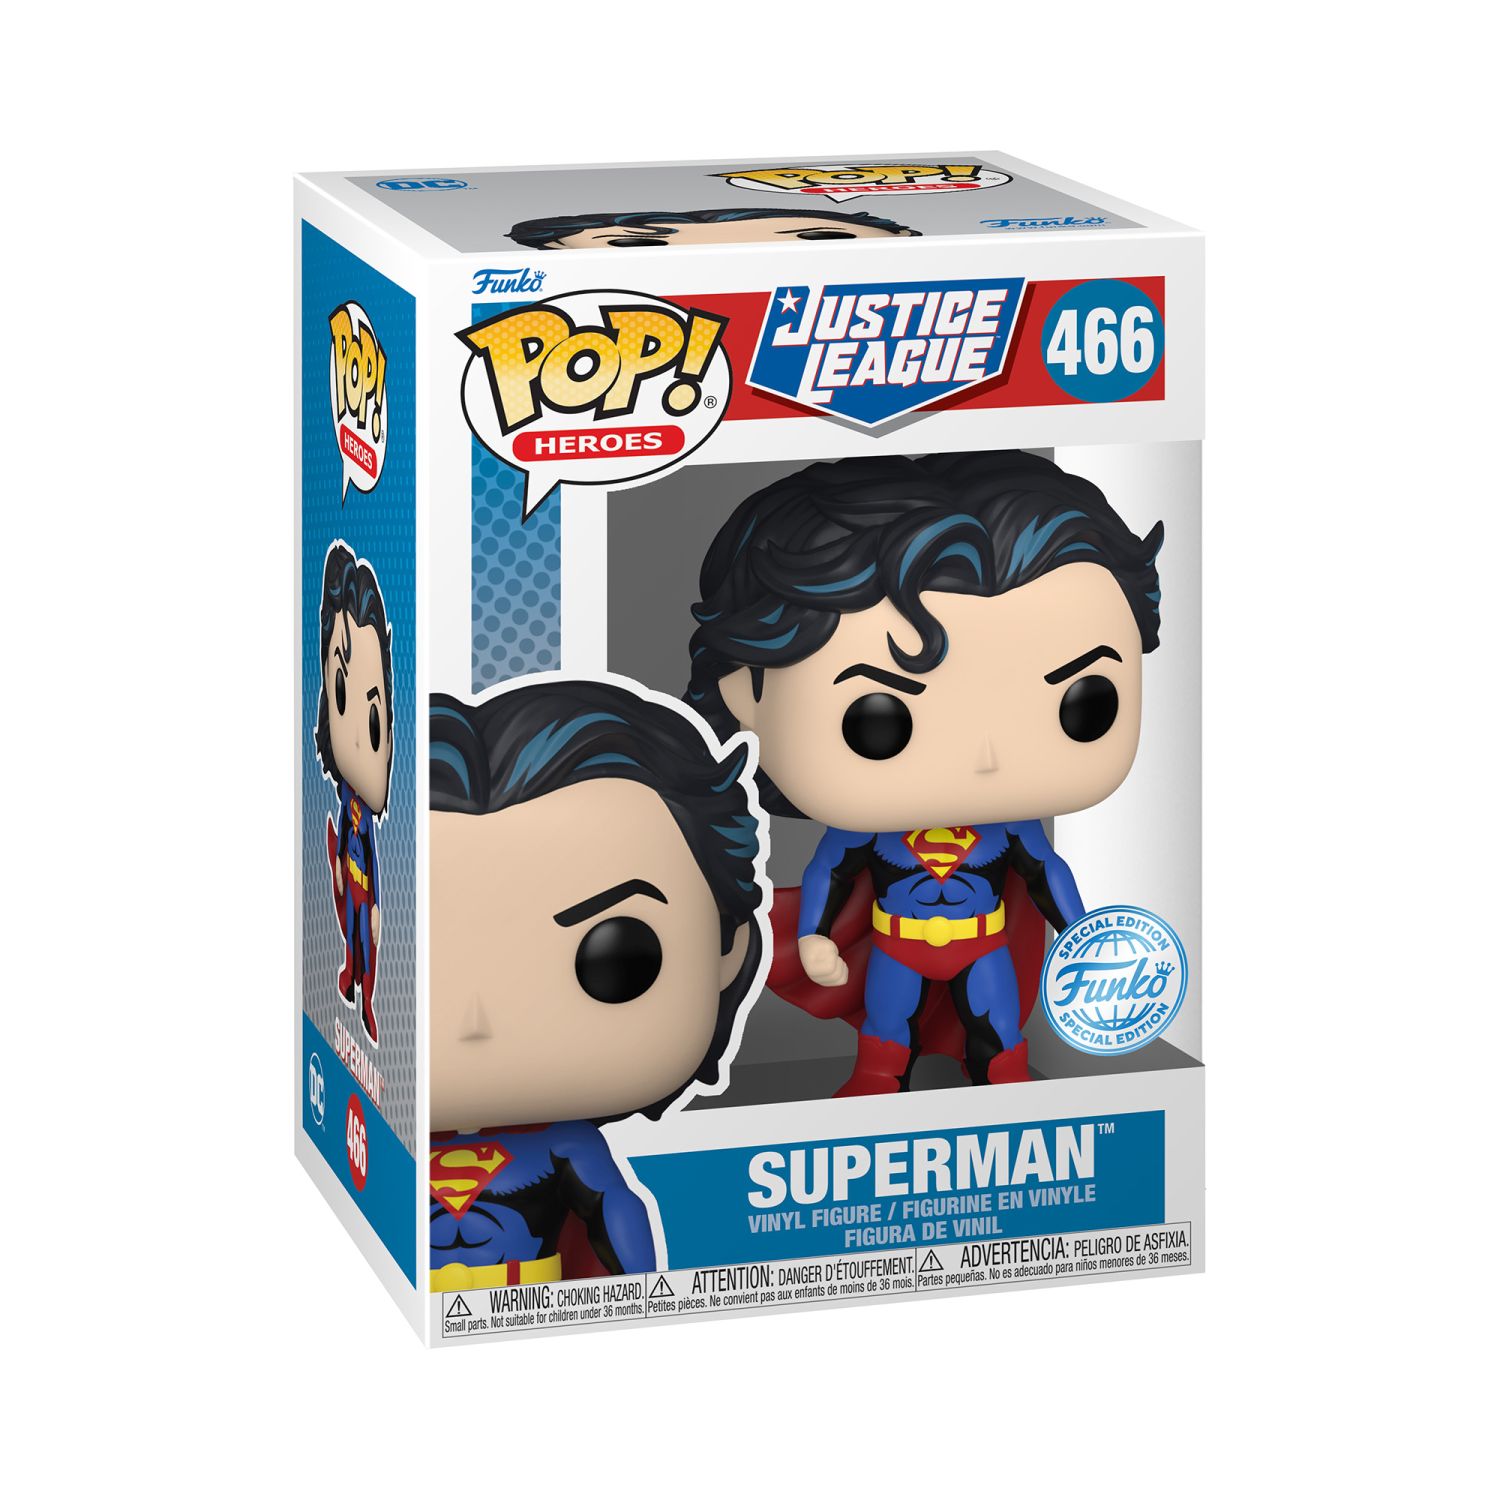 Expand your Pop! Heroes set with Heroes Justice League - Superman (Special Edition) classic. Vinyl figure is approximately 10.1cm tall.